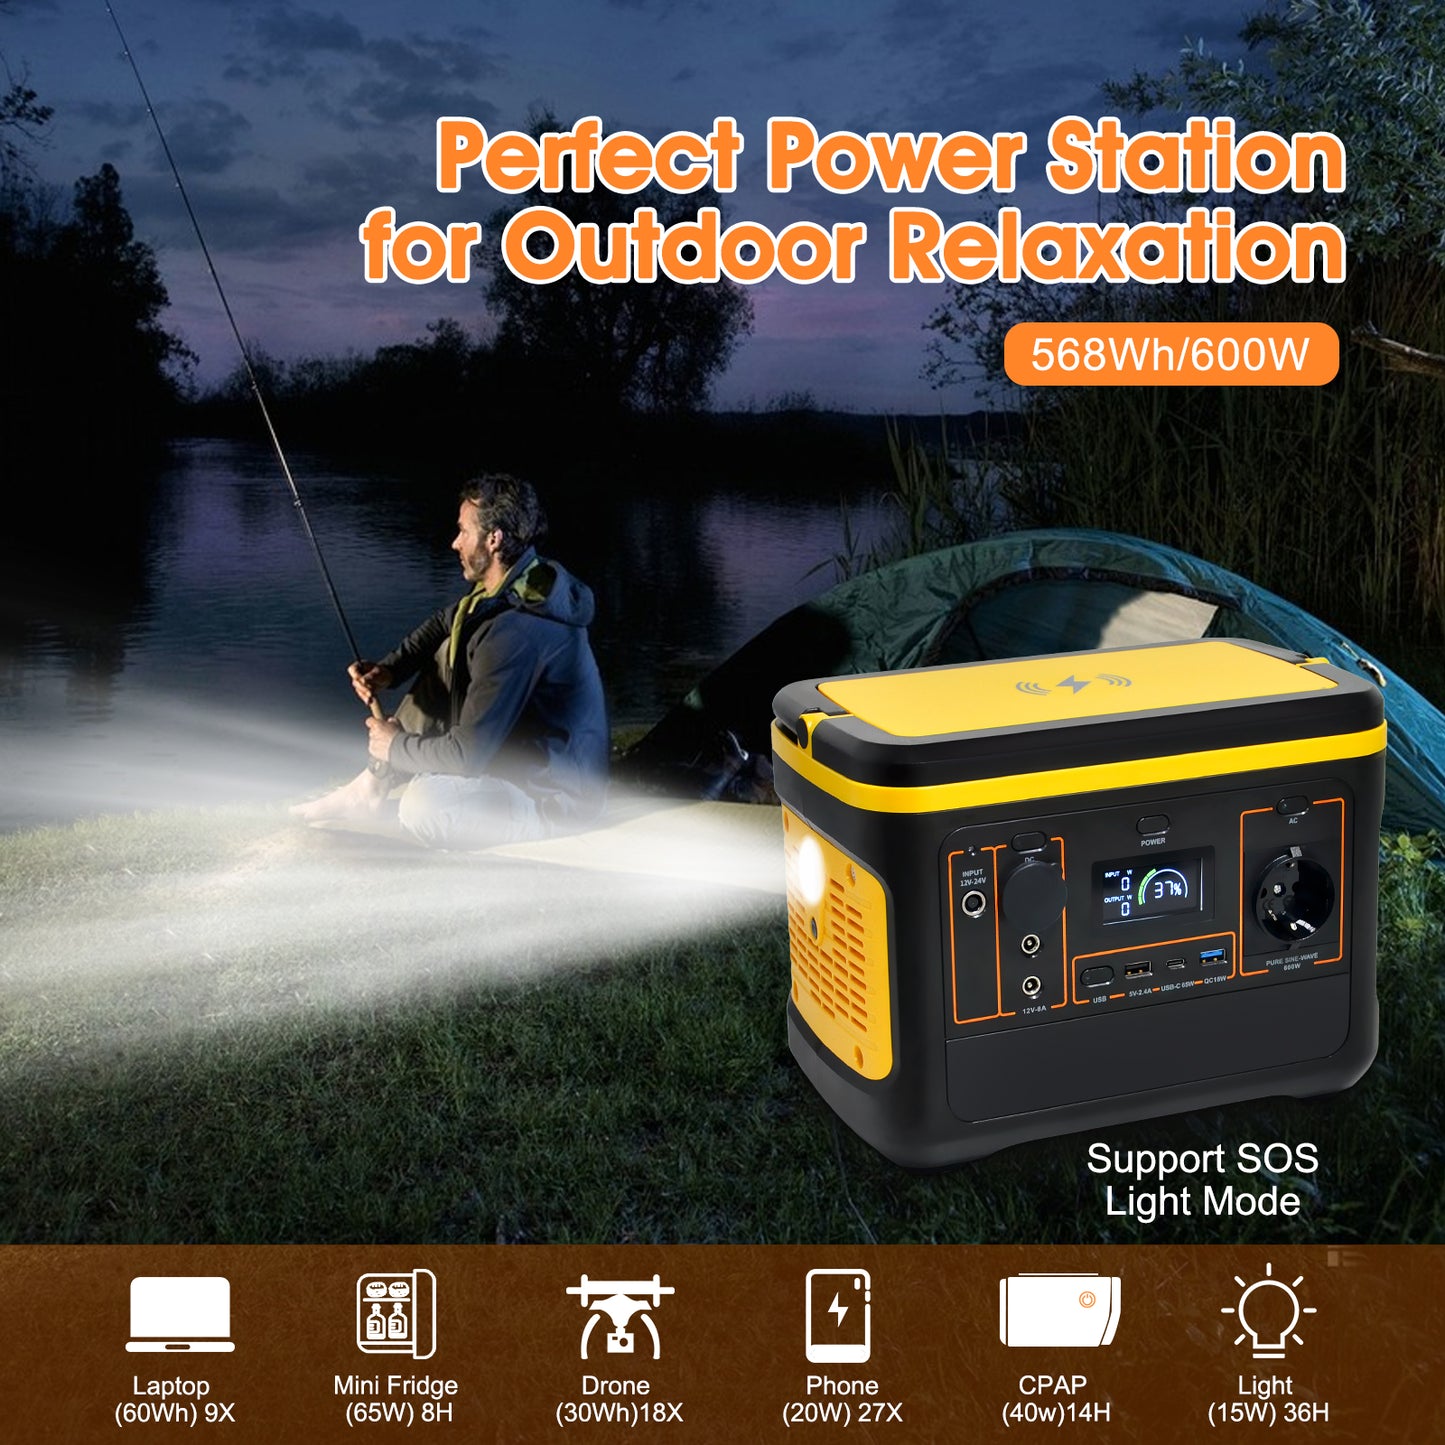 BEMETER Portable Power Station Explorer, 568Wh Backup Lithium Battery, 600W Solar Generator for Outdoors Camping Travel Hunting Blackout